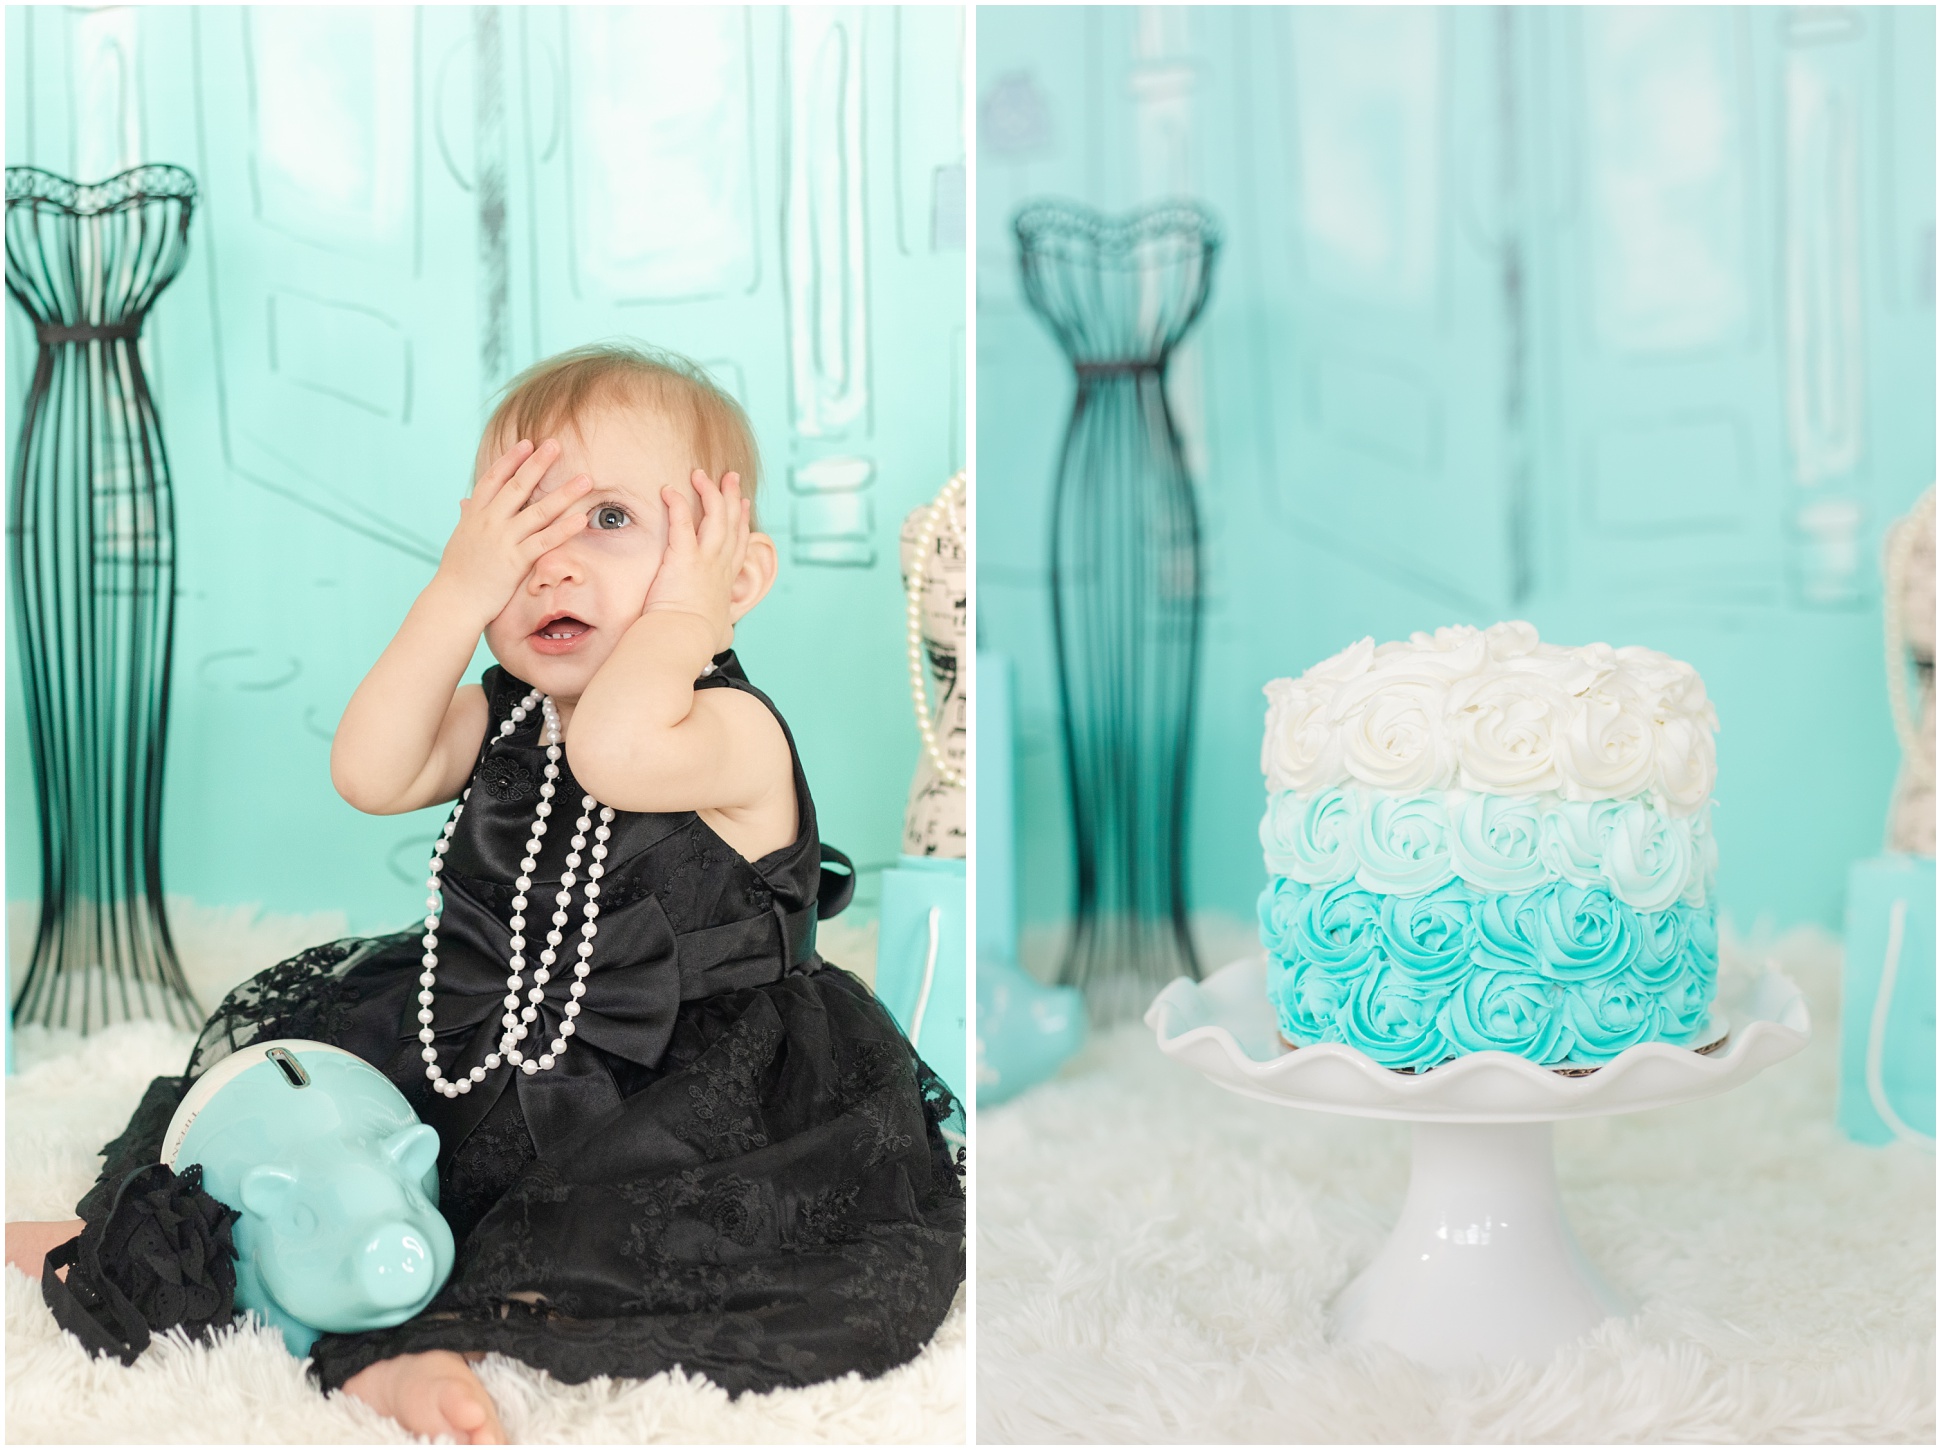 Baby having an uh oh face in black dress and pearl necklace; Ombre blue to white rose cake 